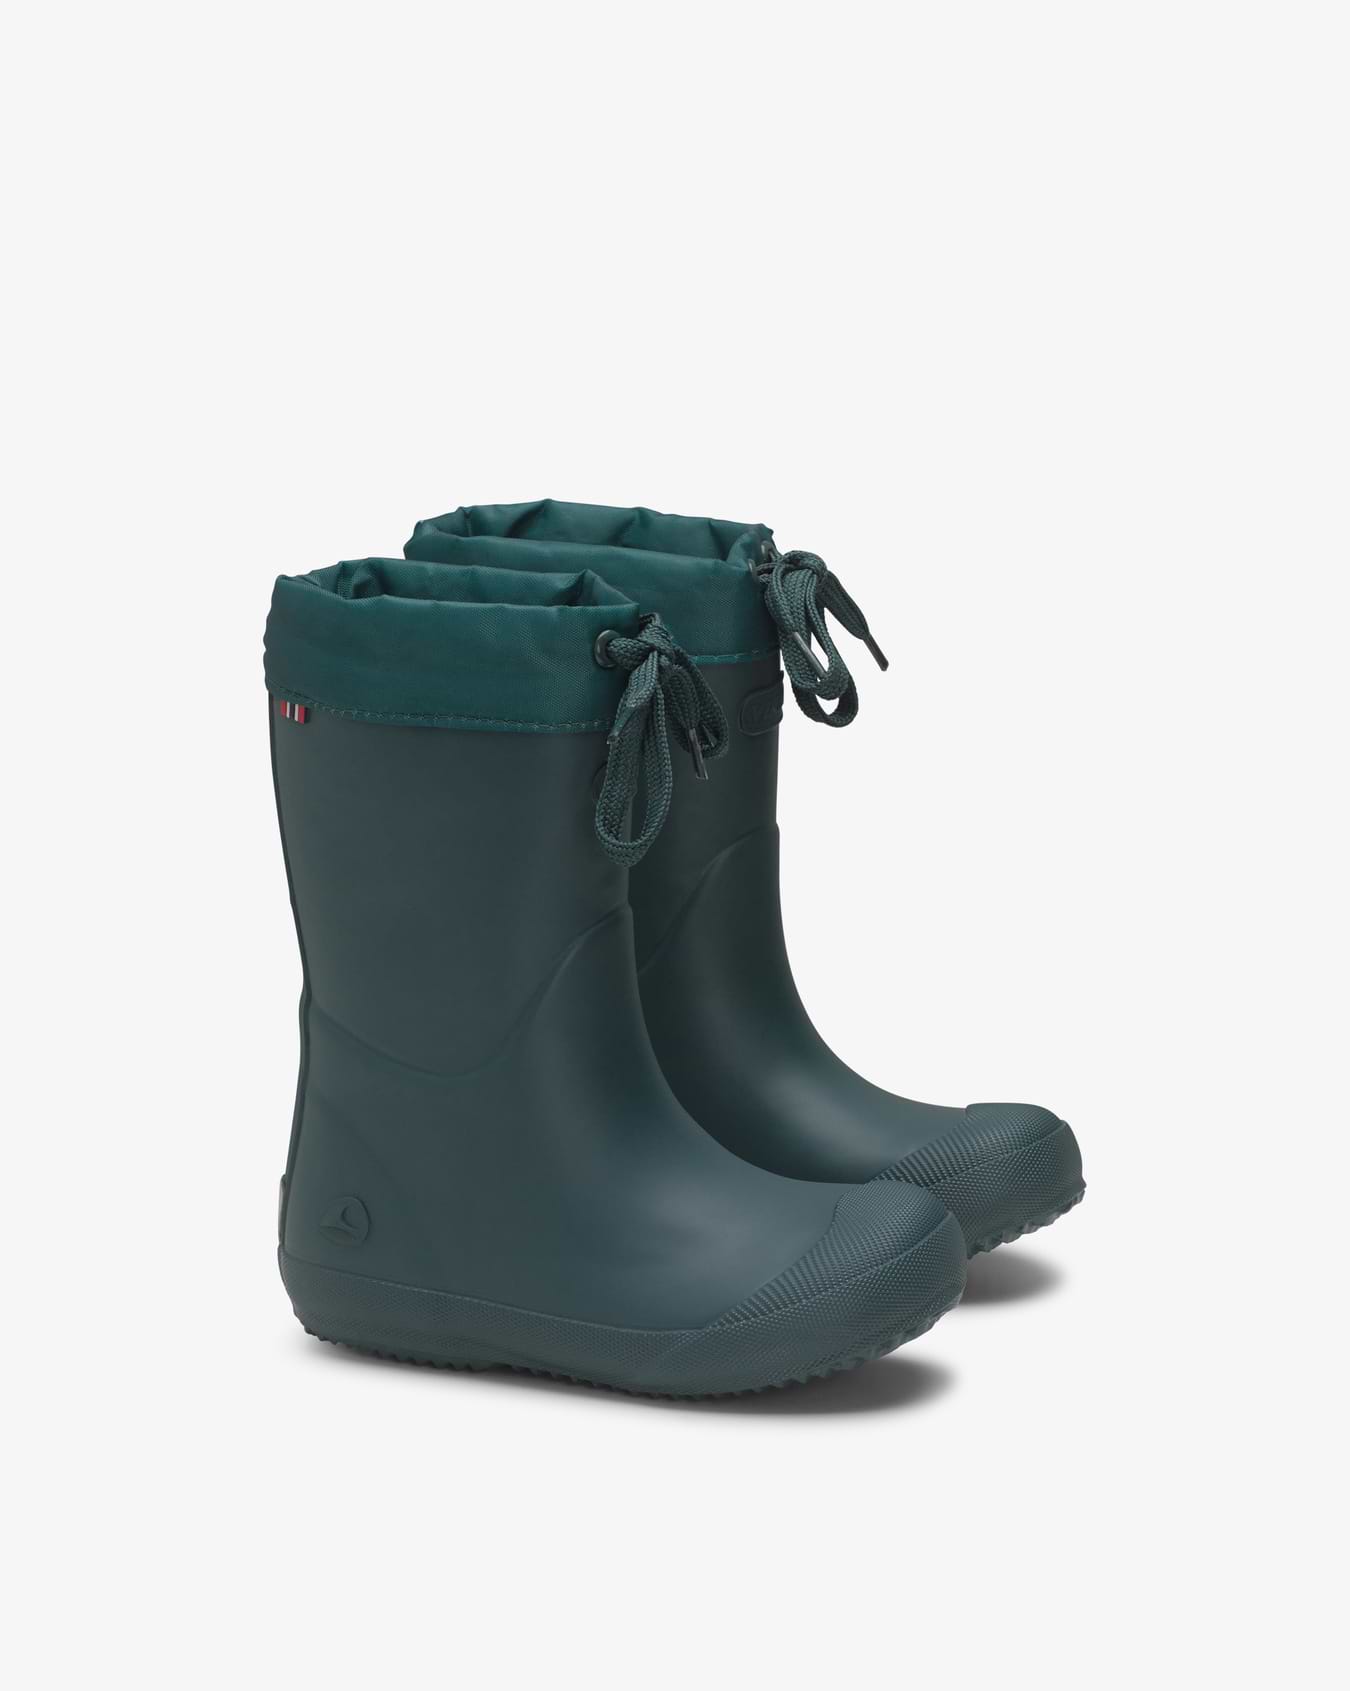 Indie Warm Petrol Rubber Boot